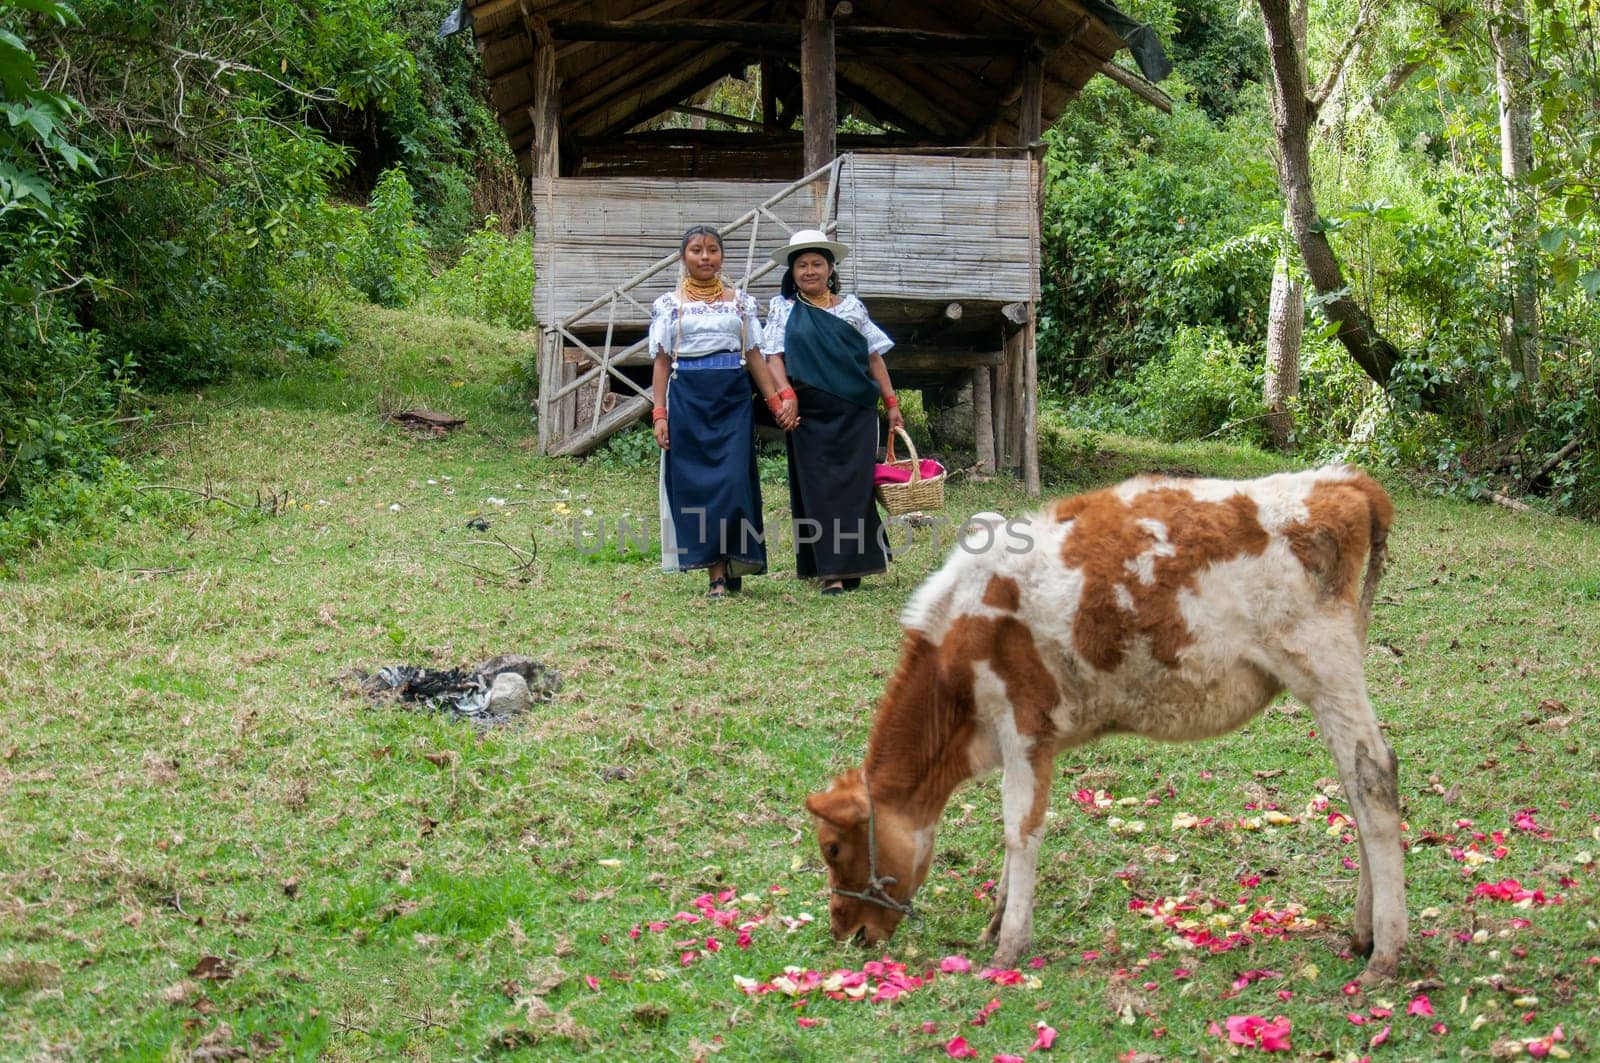 From the Amazon Crib to the Cow-Check: Indigenous Fam Bam in Action by Raulmartin